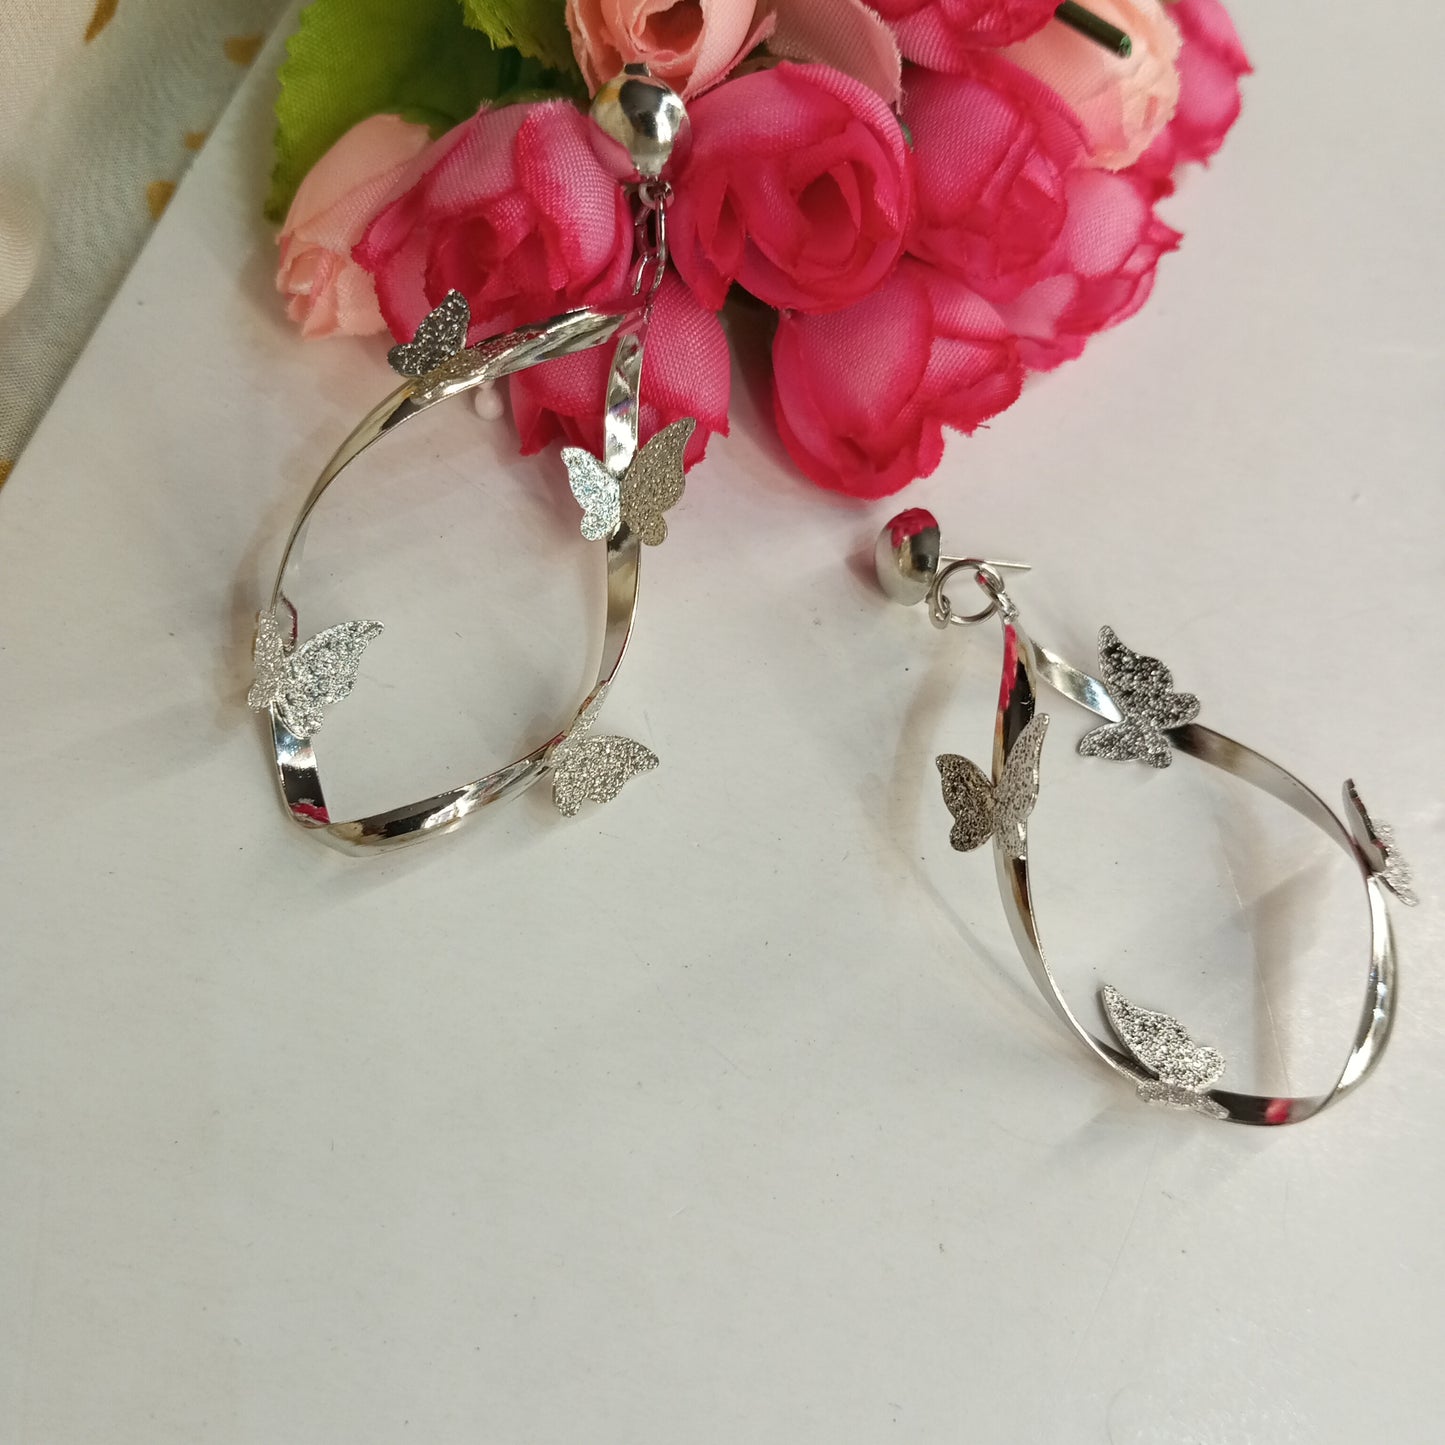 Silver Color Drop Earrings with Twisted Hanging Butterflies